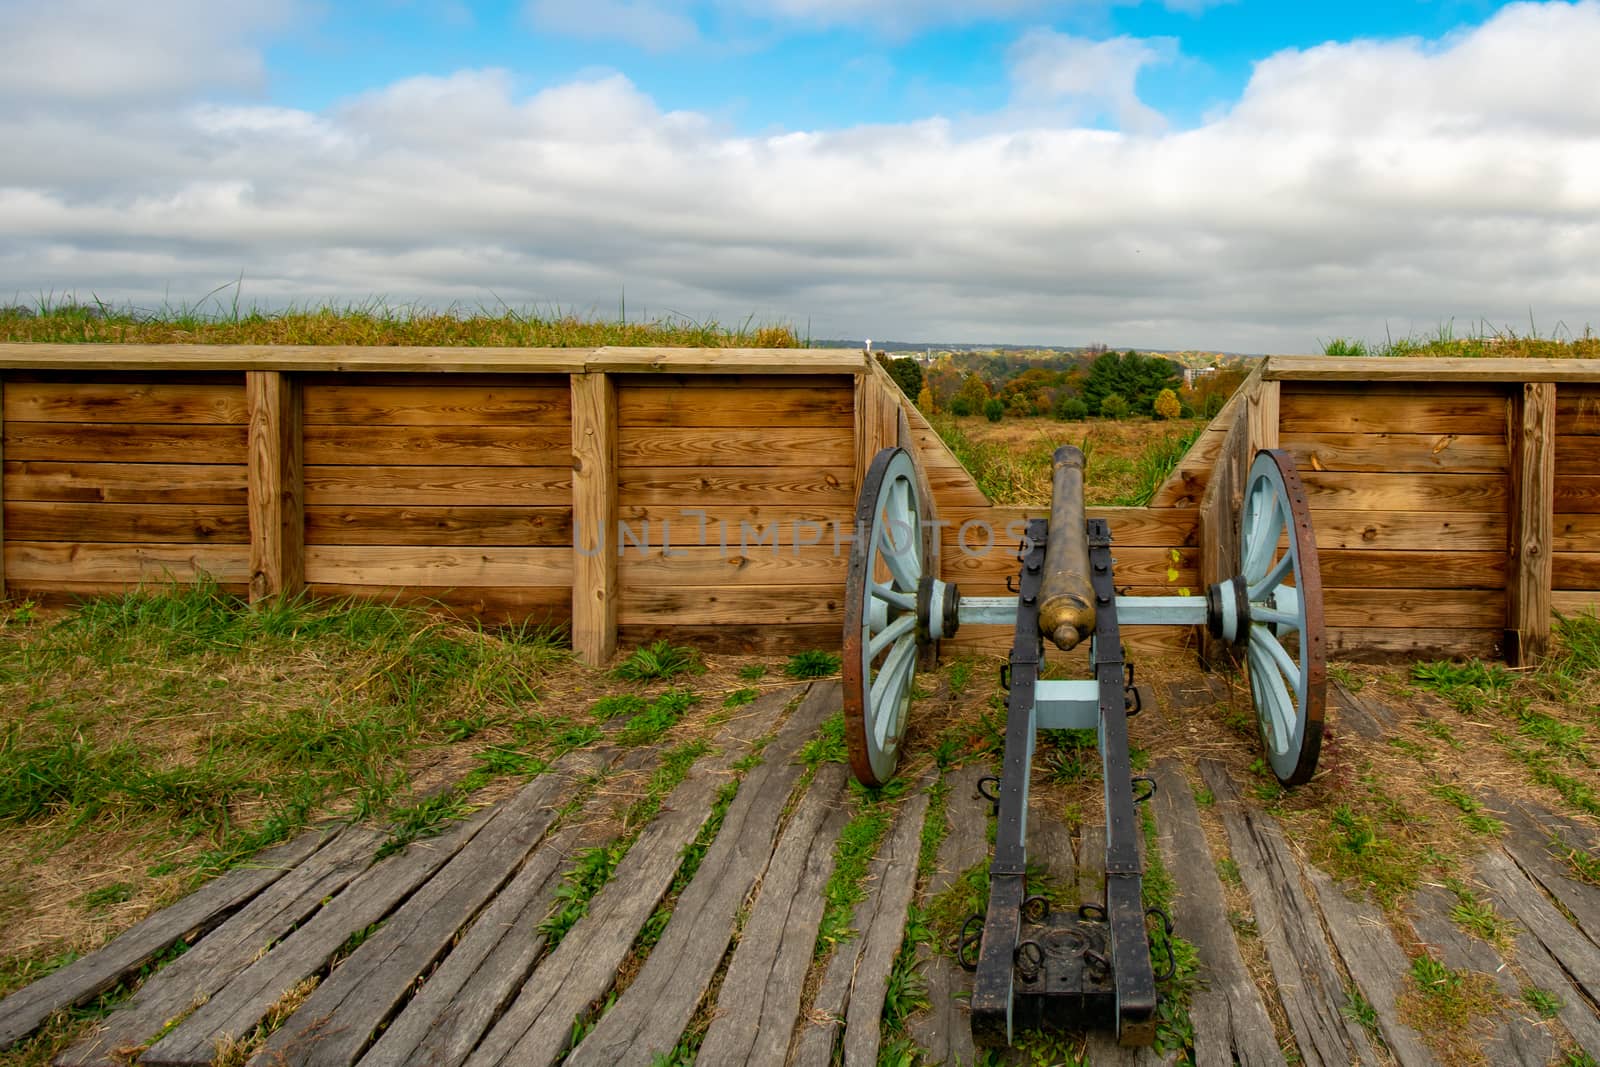 A Revolutionary War Era Cannon at a Redoubt in Valley Forge Nati by bju12290